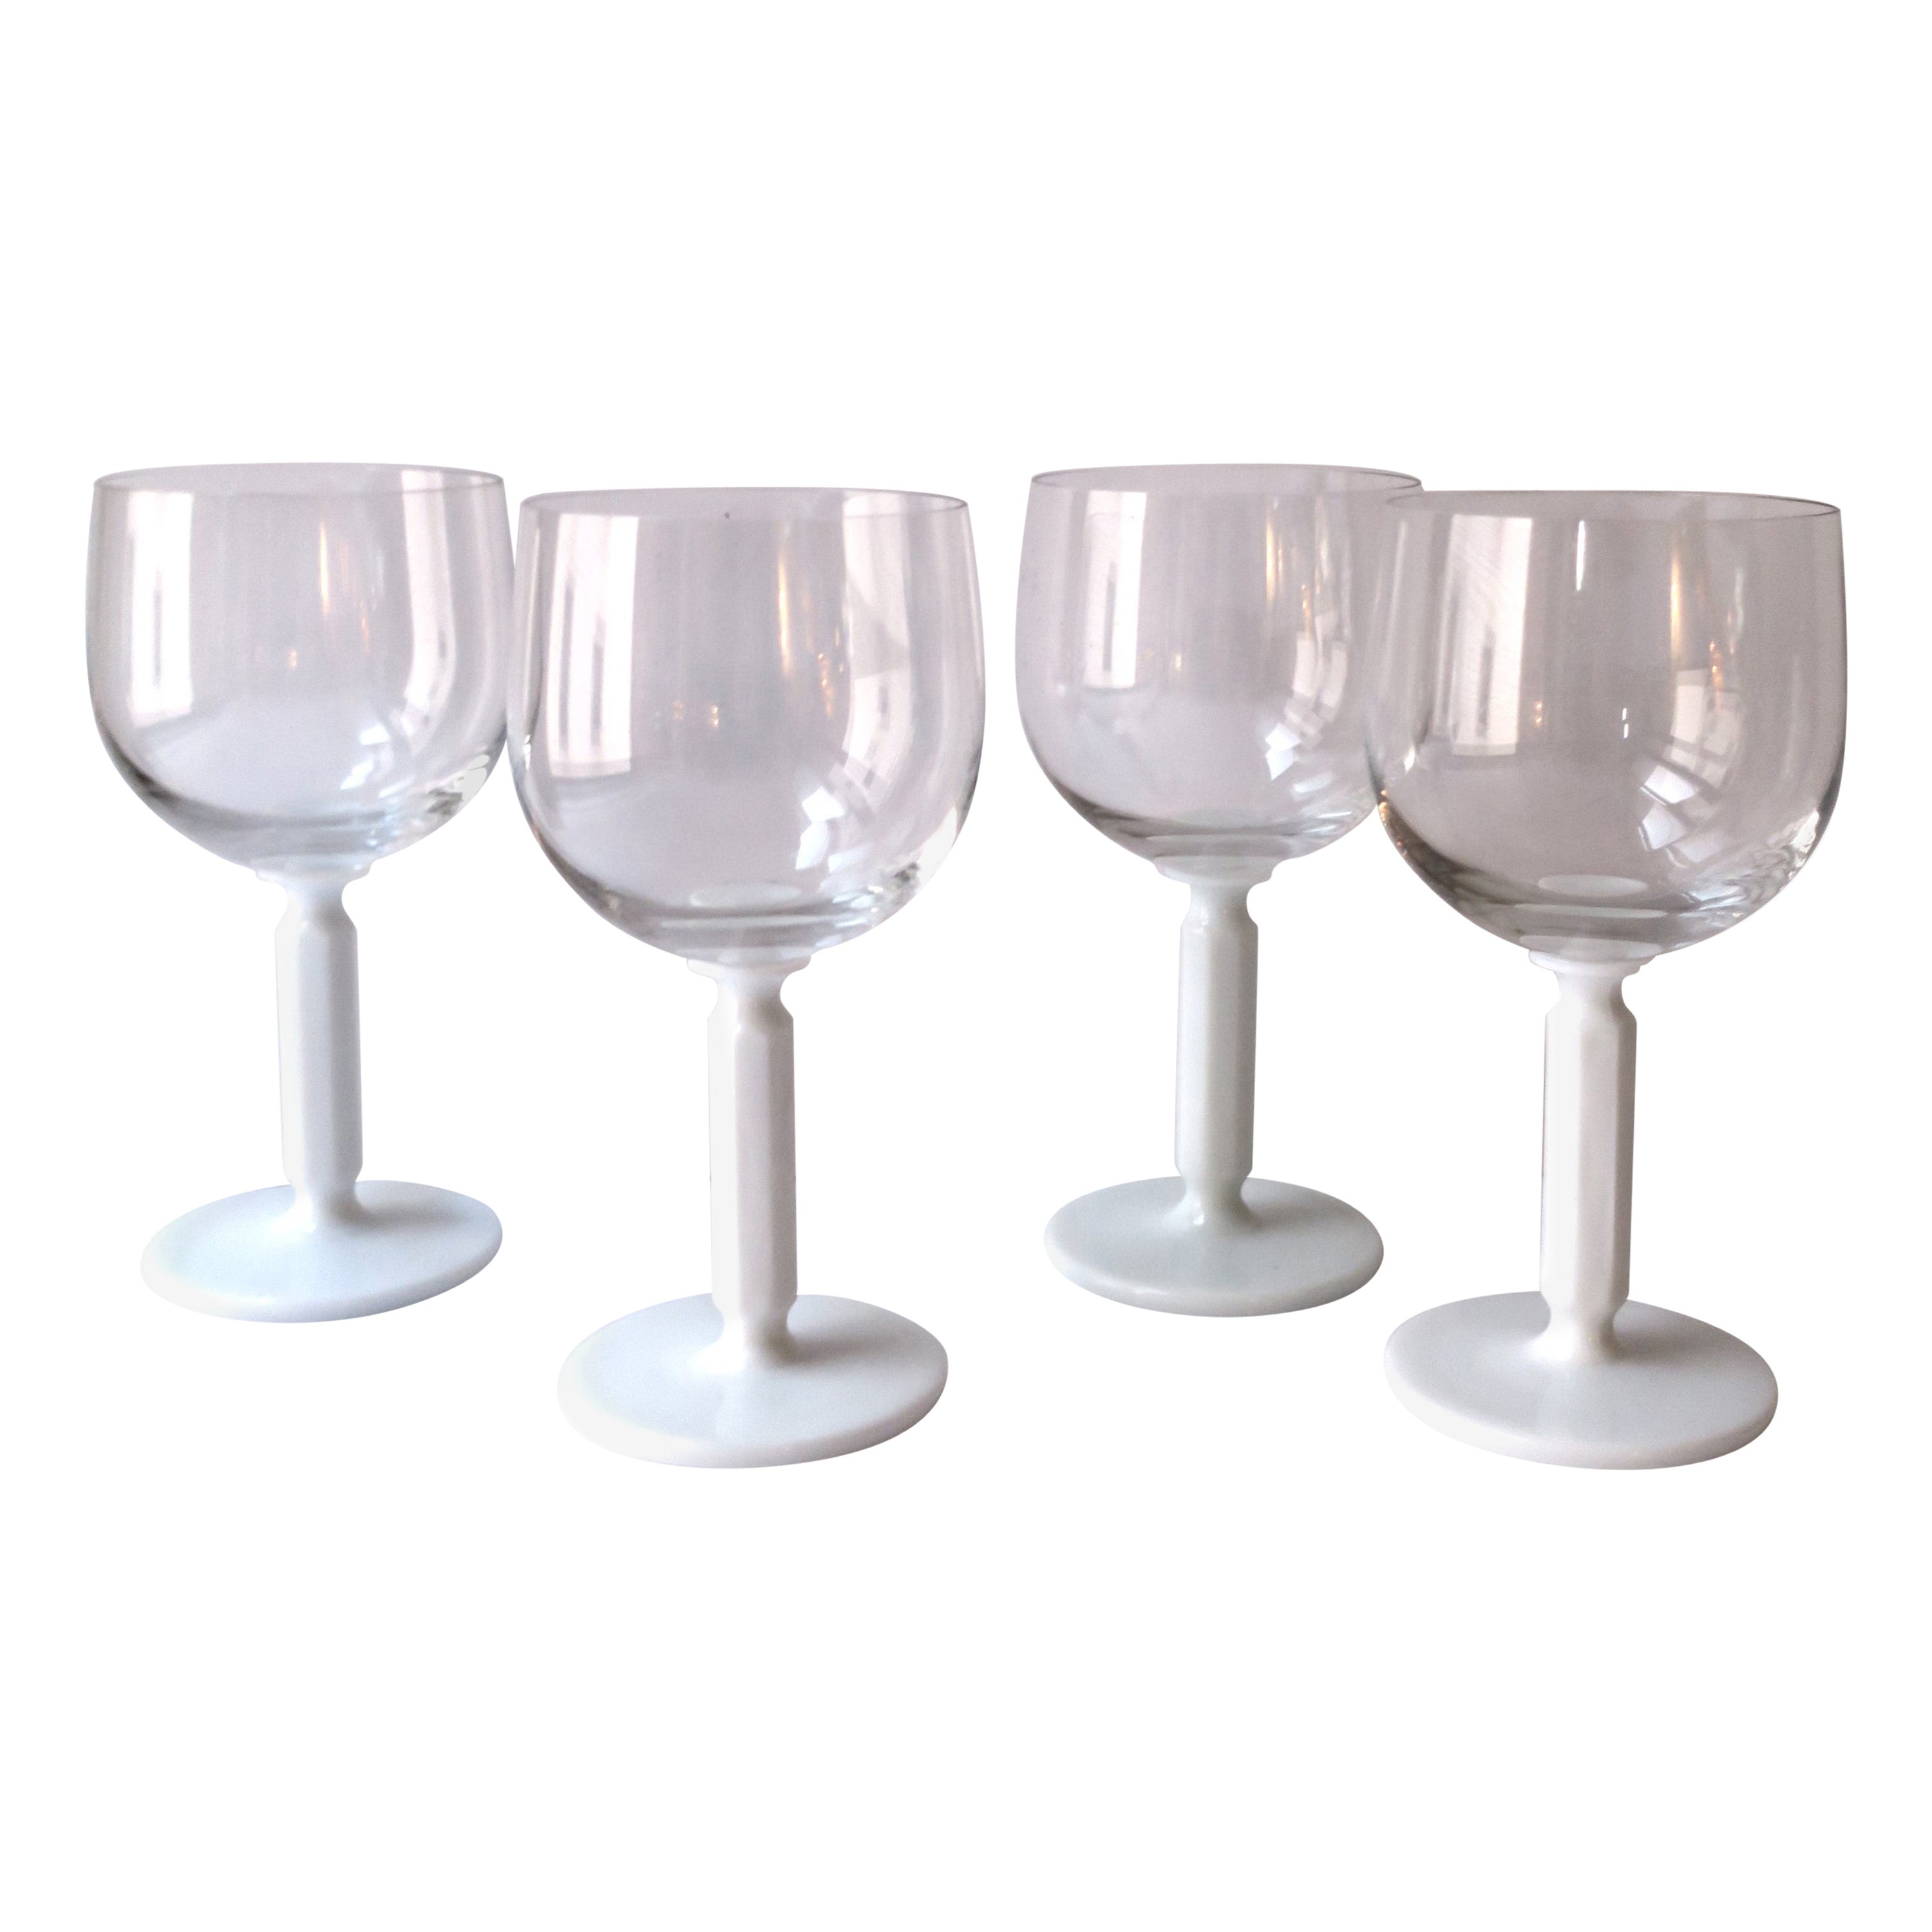 Rosenthal Studio-Line Wine or Cocktail Glasses with White Glass Stem, Set of 4 For Sale